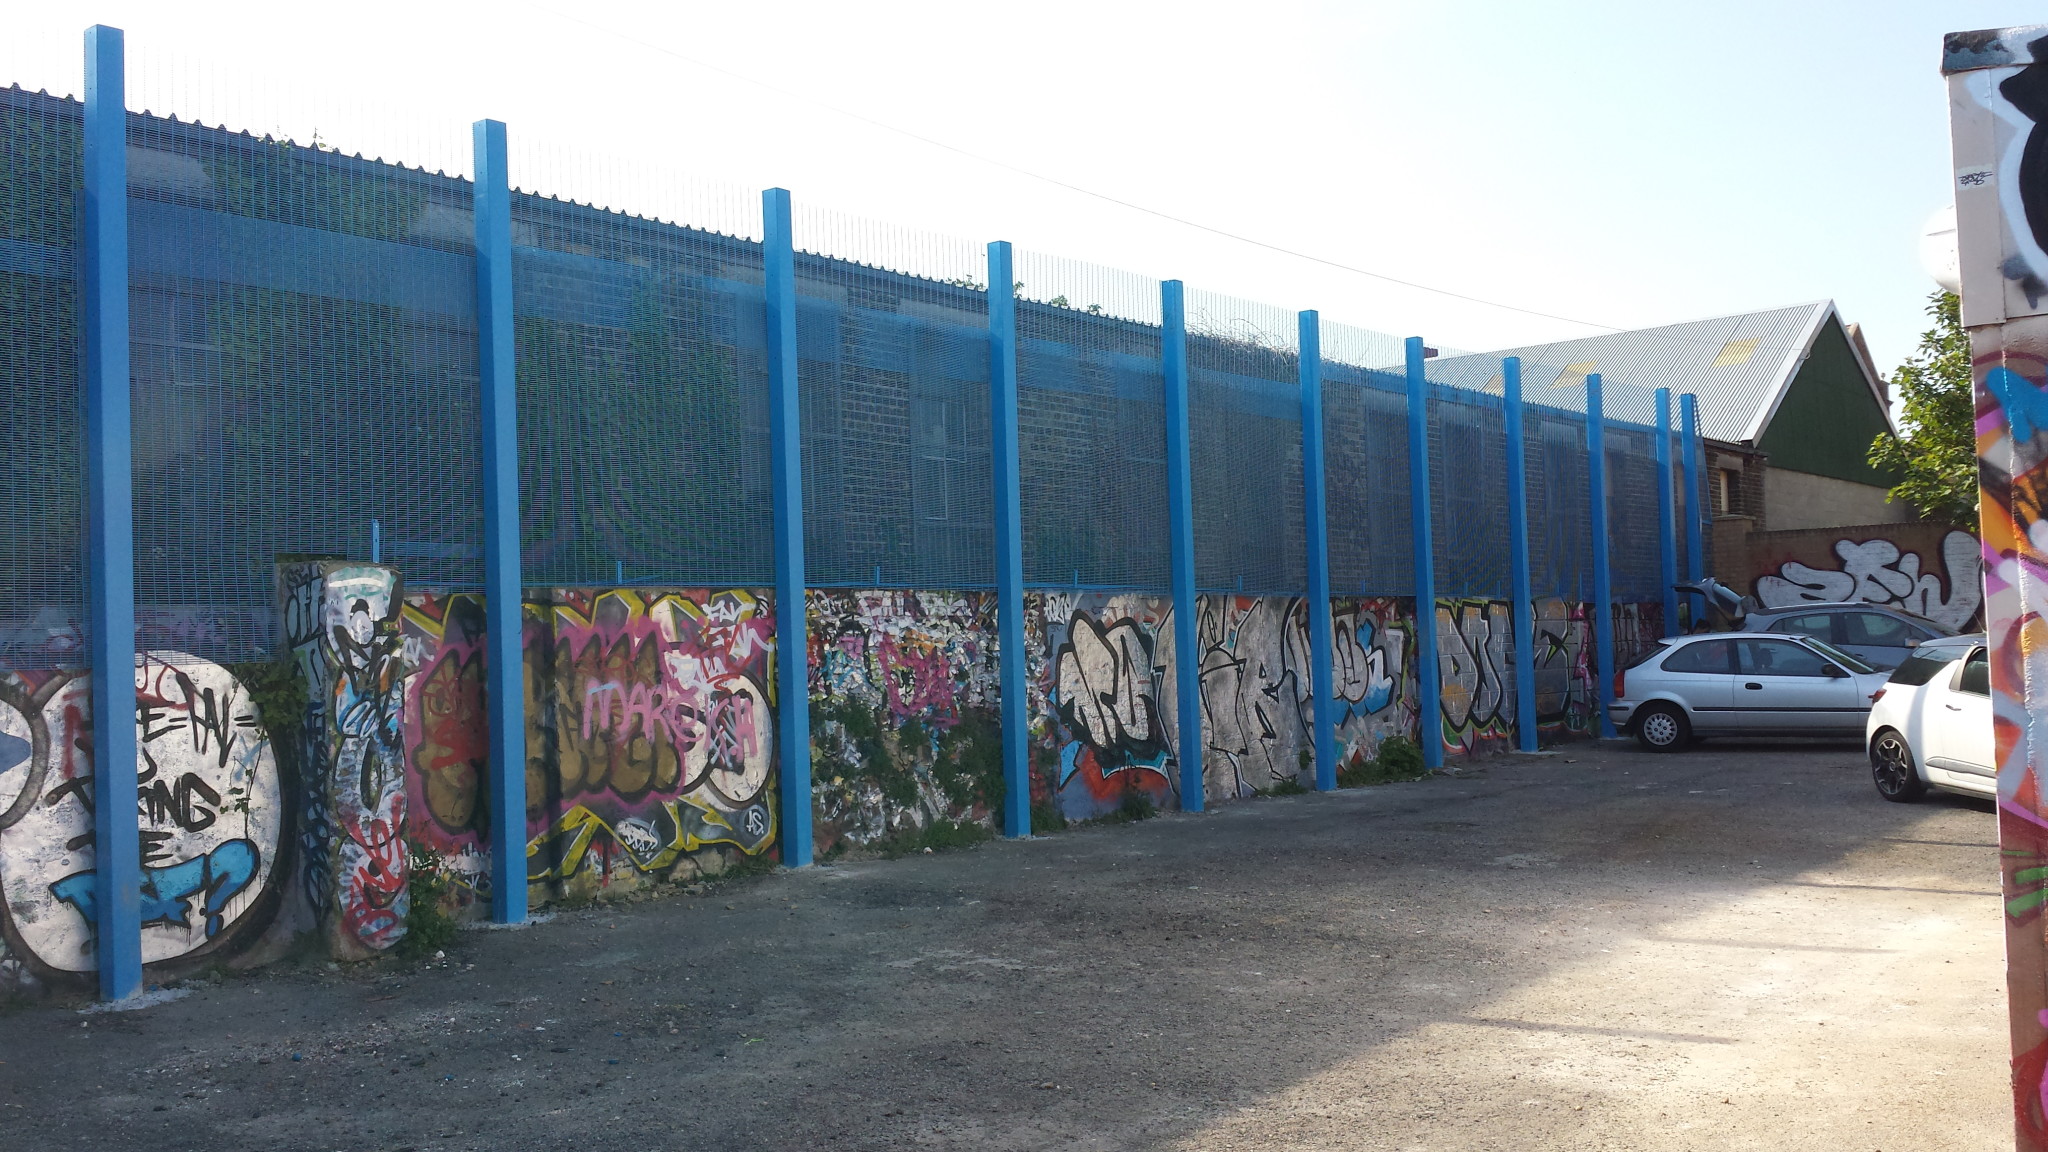 Youth Club Security Fencing & Anti-Climb Measures - Waller Services in Kent